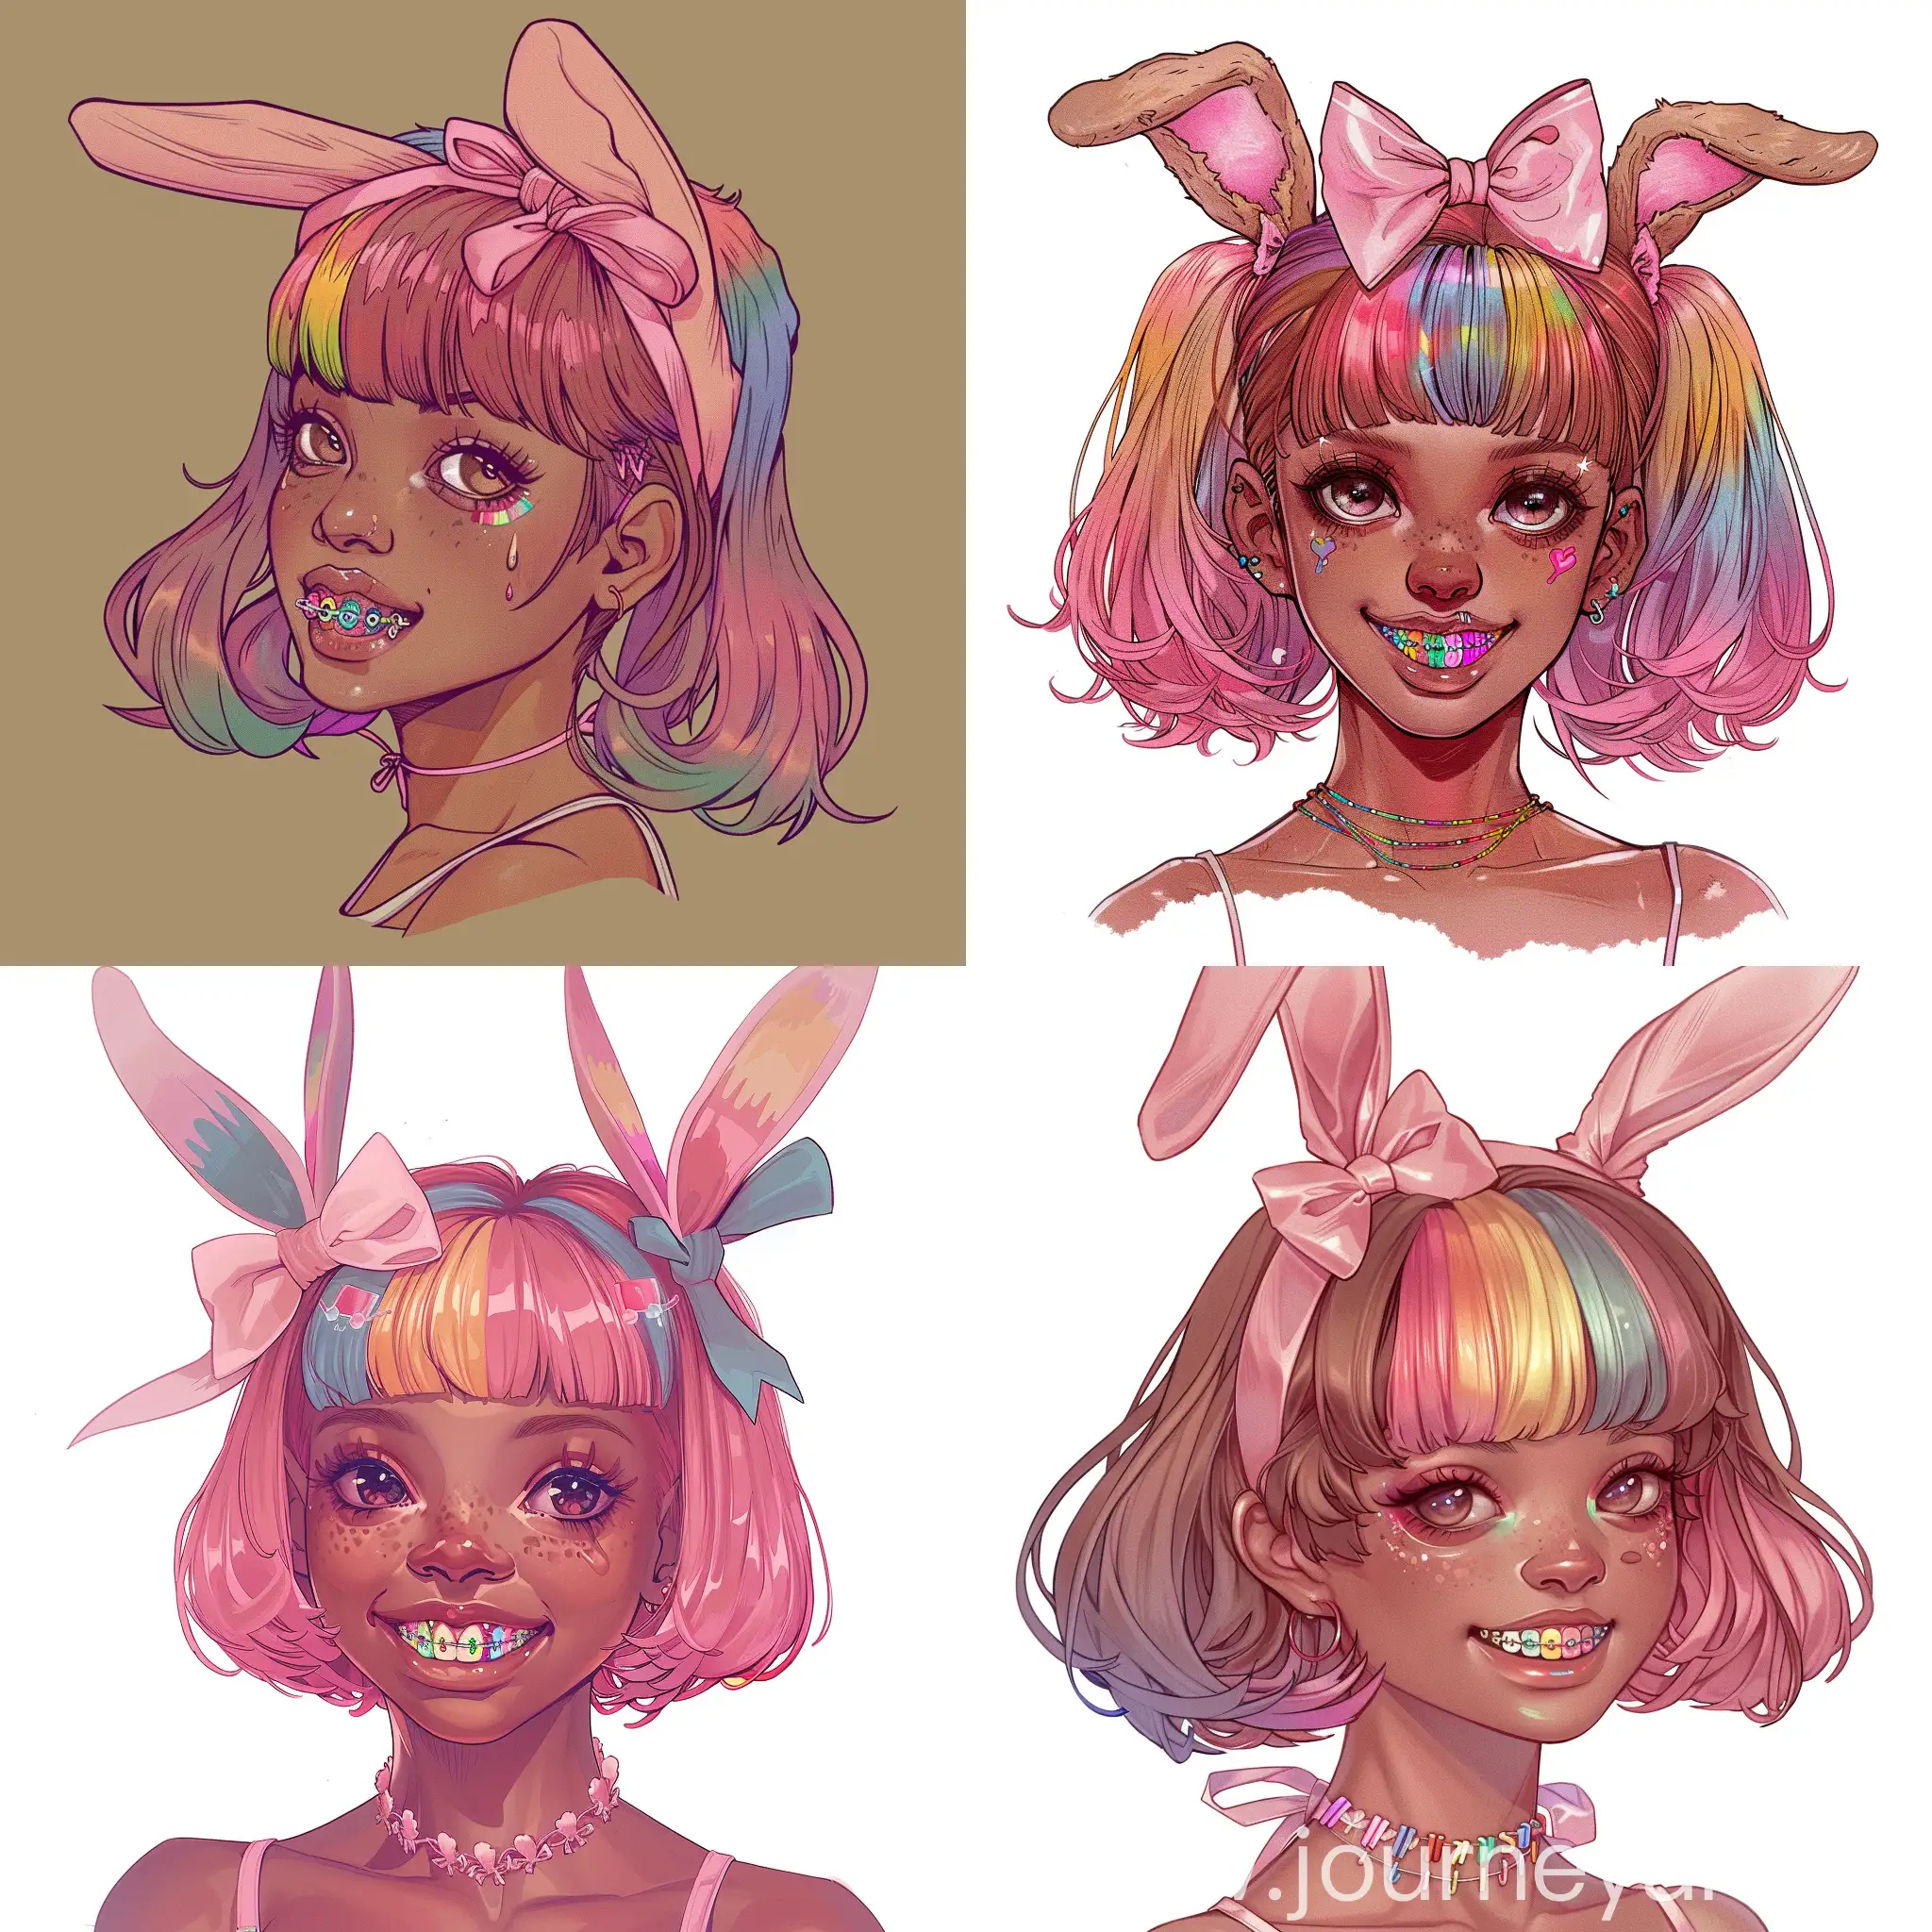 A brown skin colored girl with pink hair with pastel rainbow dyed bangs, she has short colored hair in a half up half down style with pigtails, she has a pink bow in her hair, she has bunny ears, she has buck teeth with rainbow braces